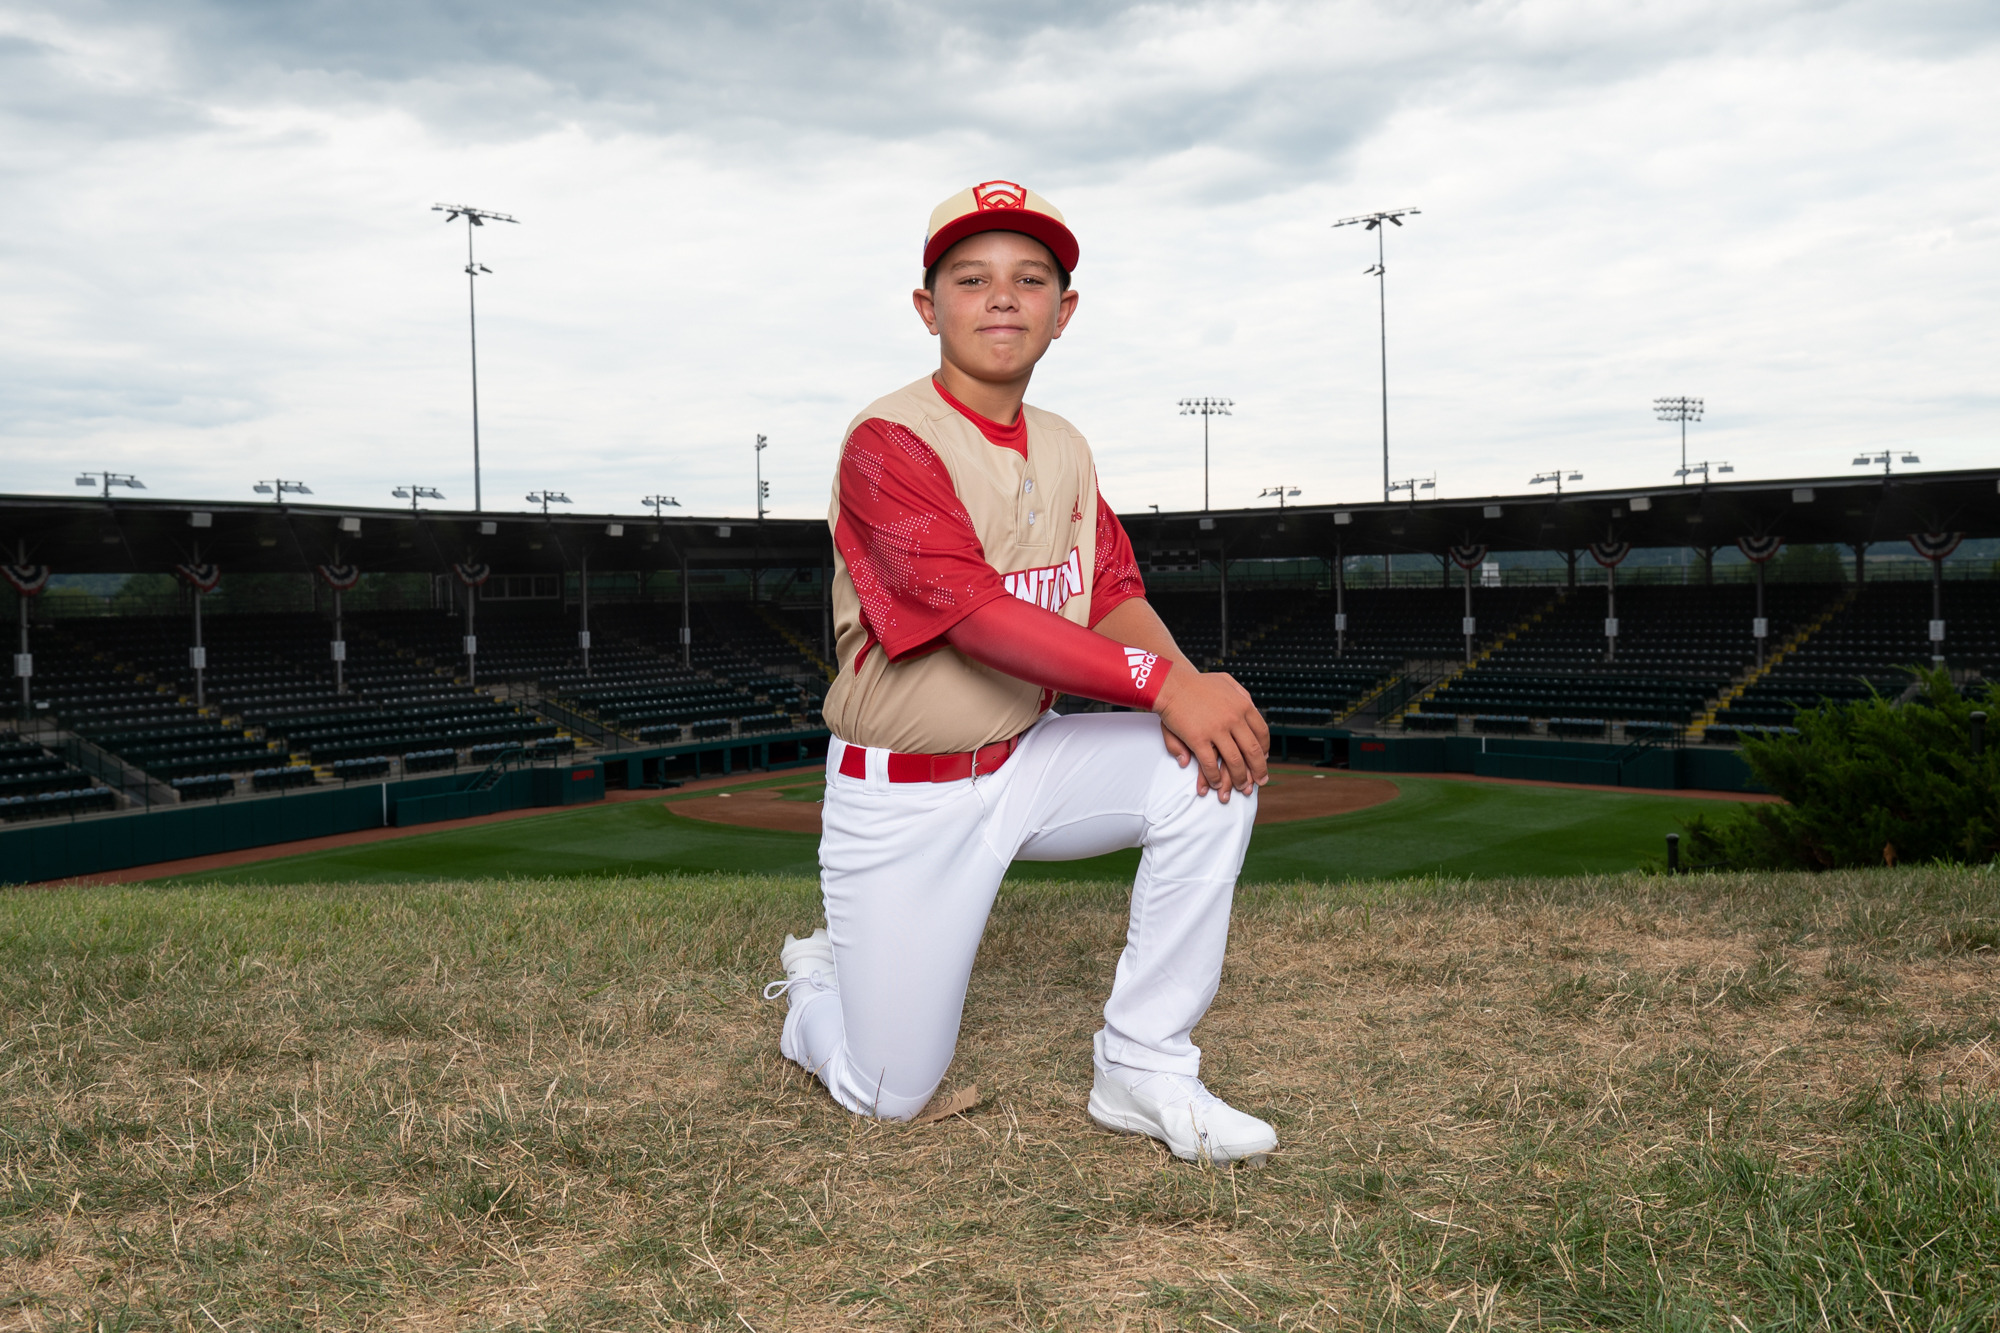 Boy quits little league baseball team to help mom recover from broken neck  – New York Daily News